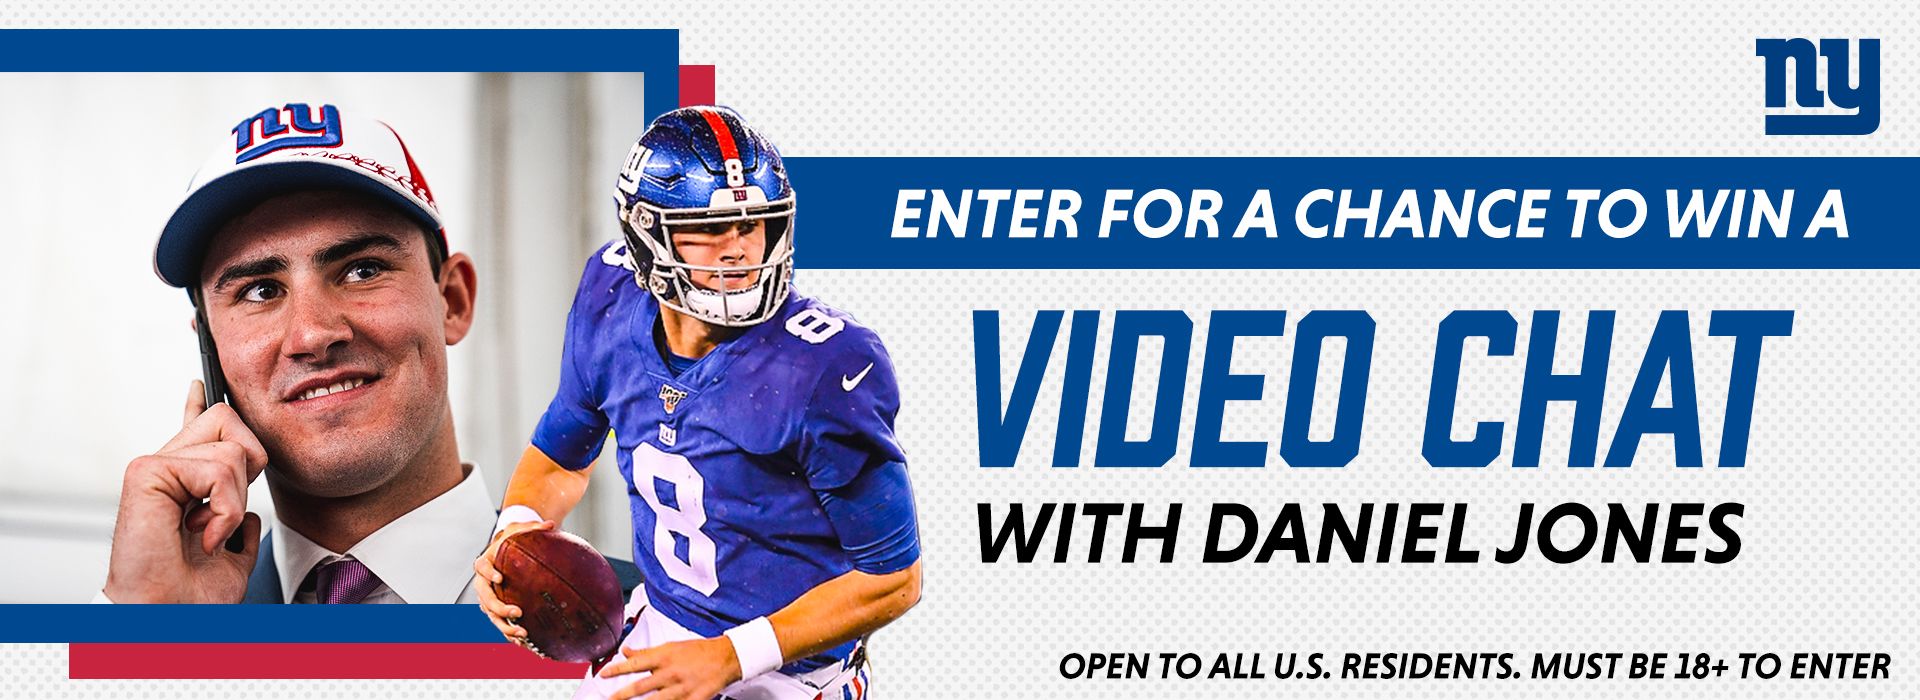 Enter for a chance to win a video chat with Daniel Jones